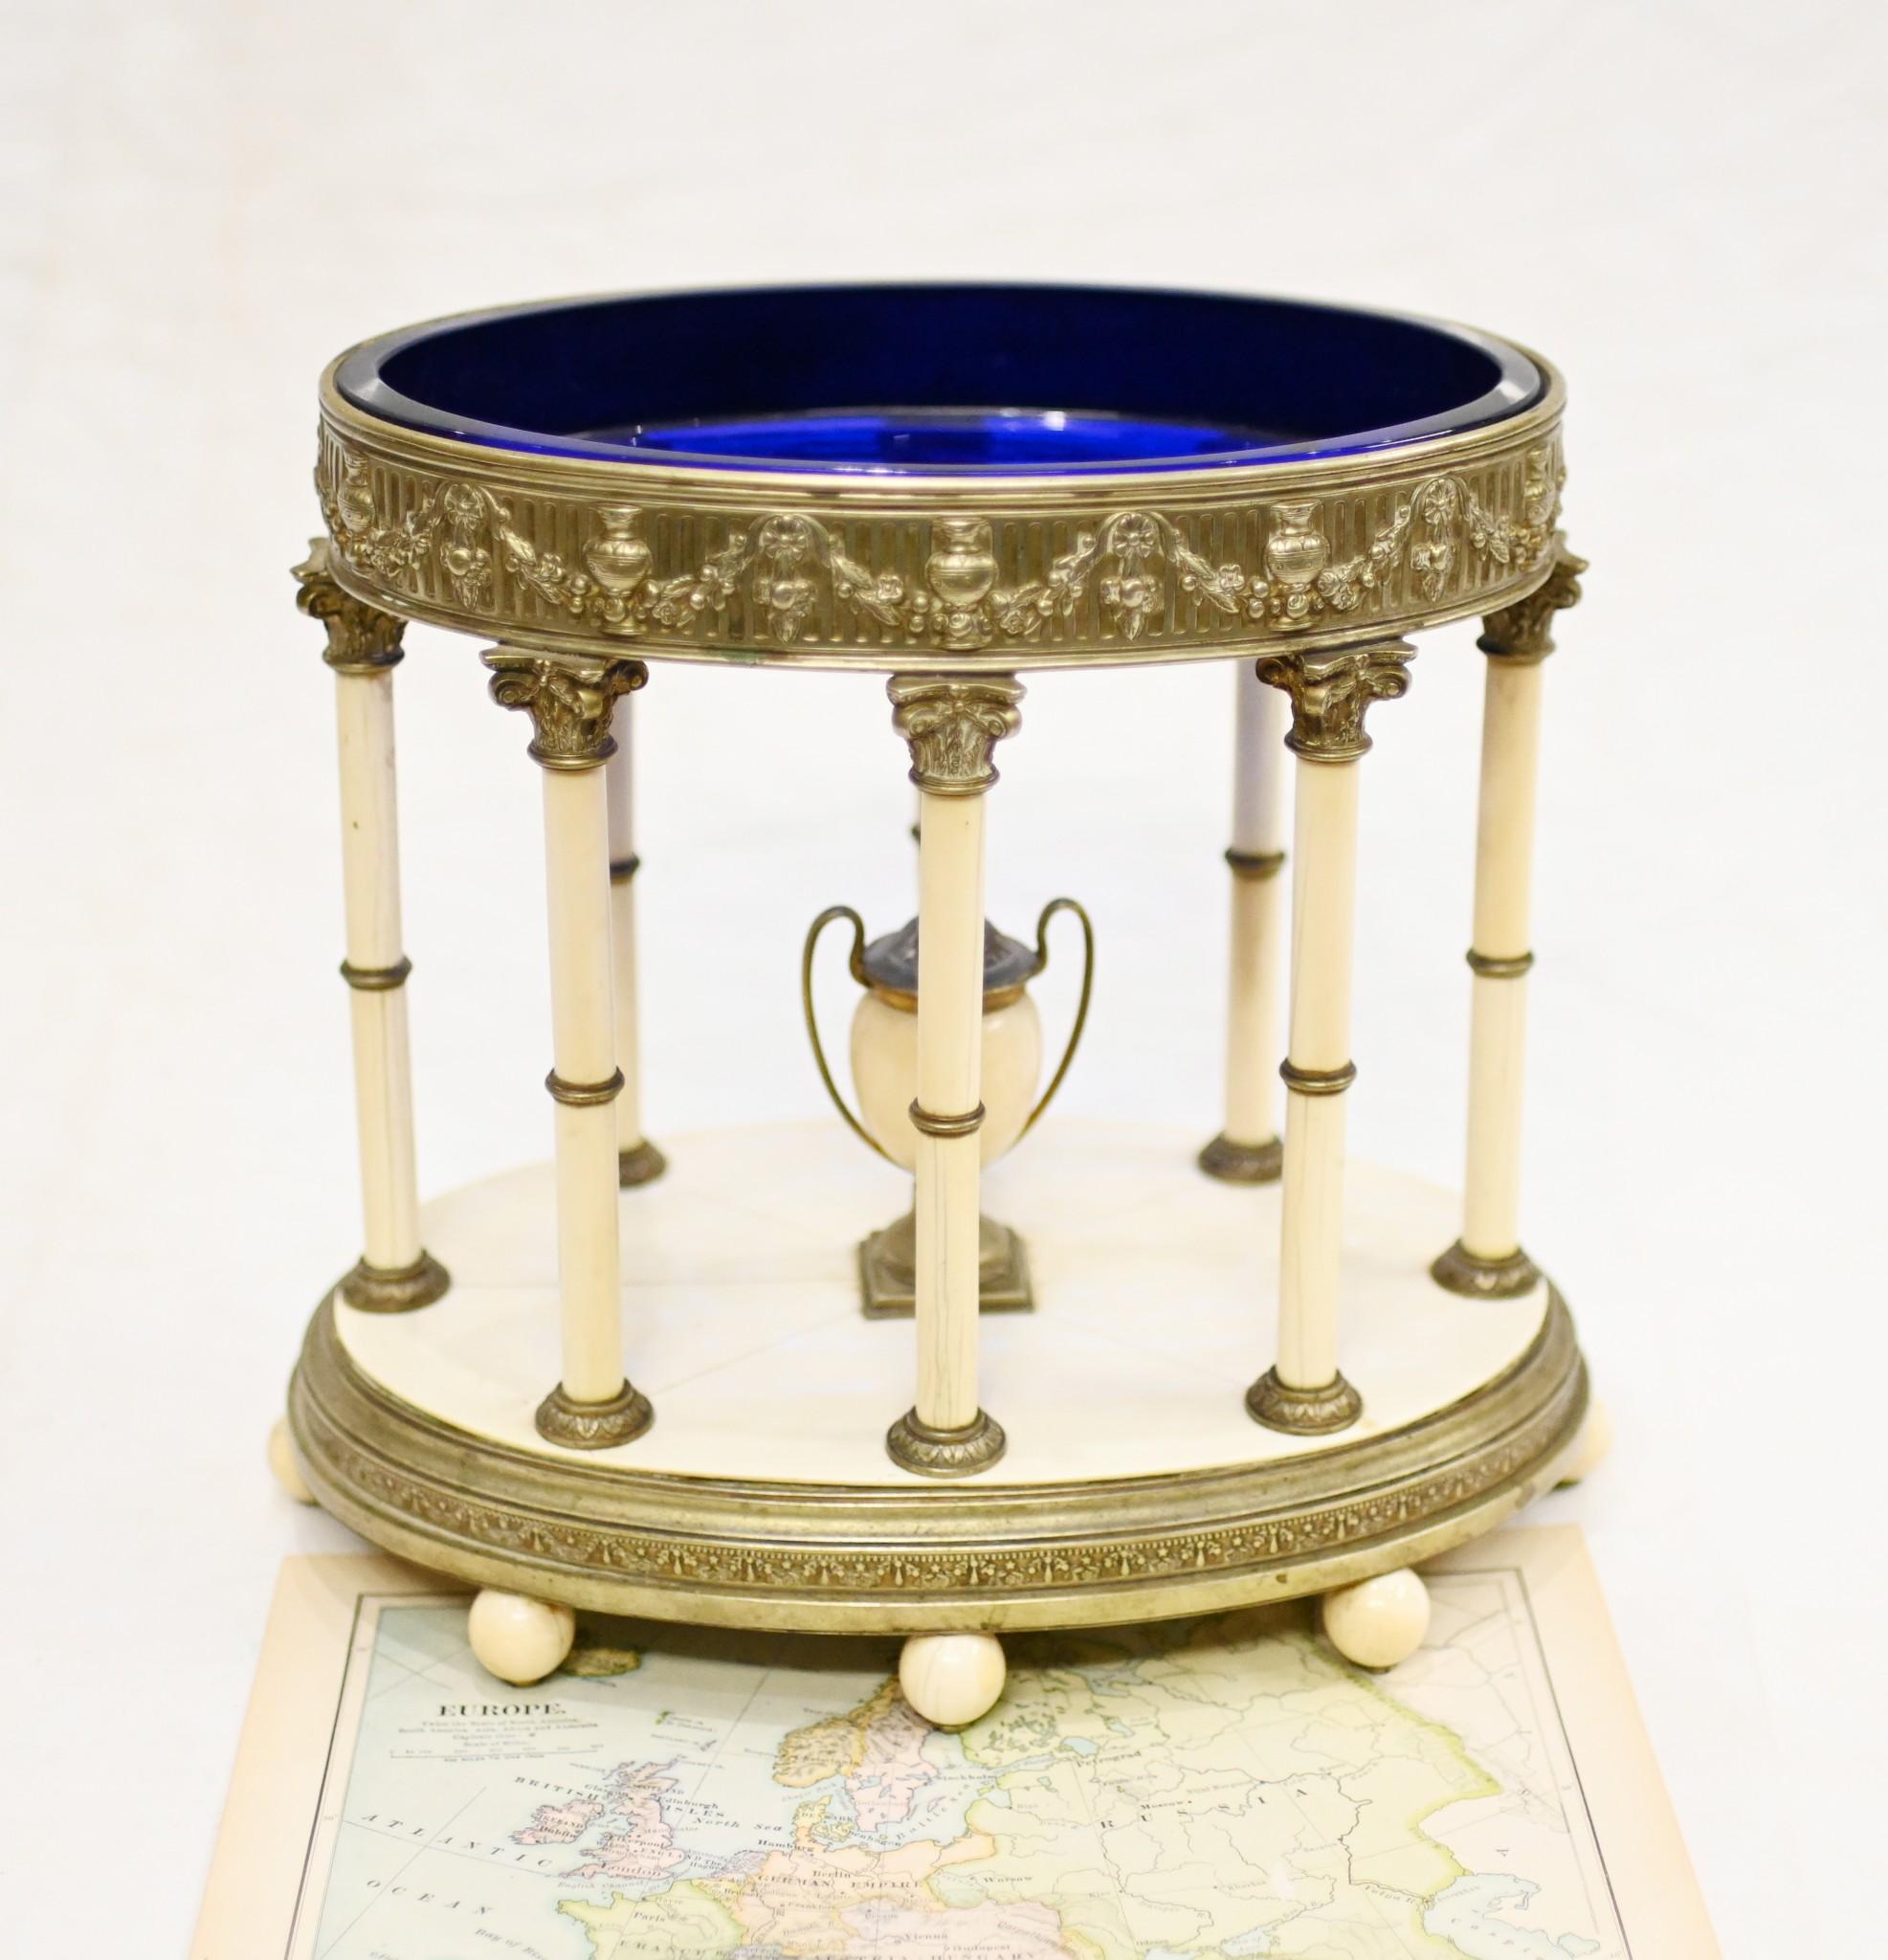 Gorgeous Grand Tour model of an oval temple we date to circa 1890
Such an elegant piece crafted from bone and silver plate
Classic Corinthian columns support the silver plate pediment in which the Bristol colbalt blue glass dish sits
In the centre